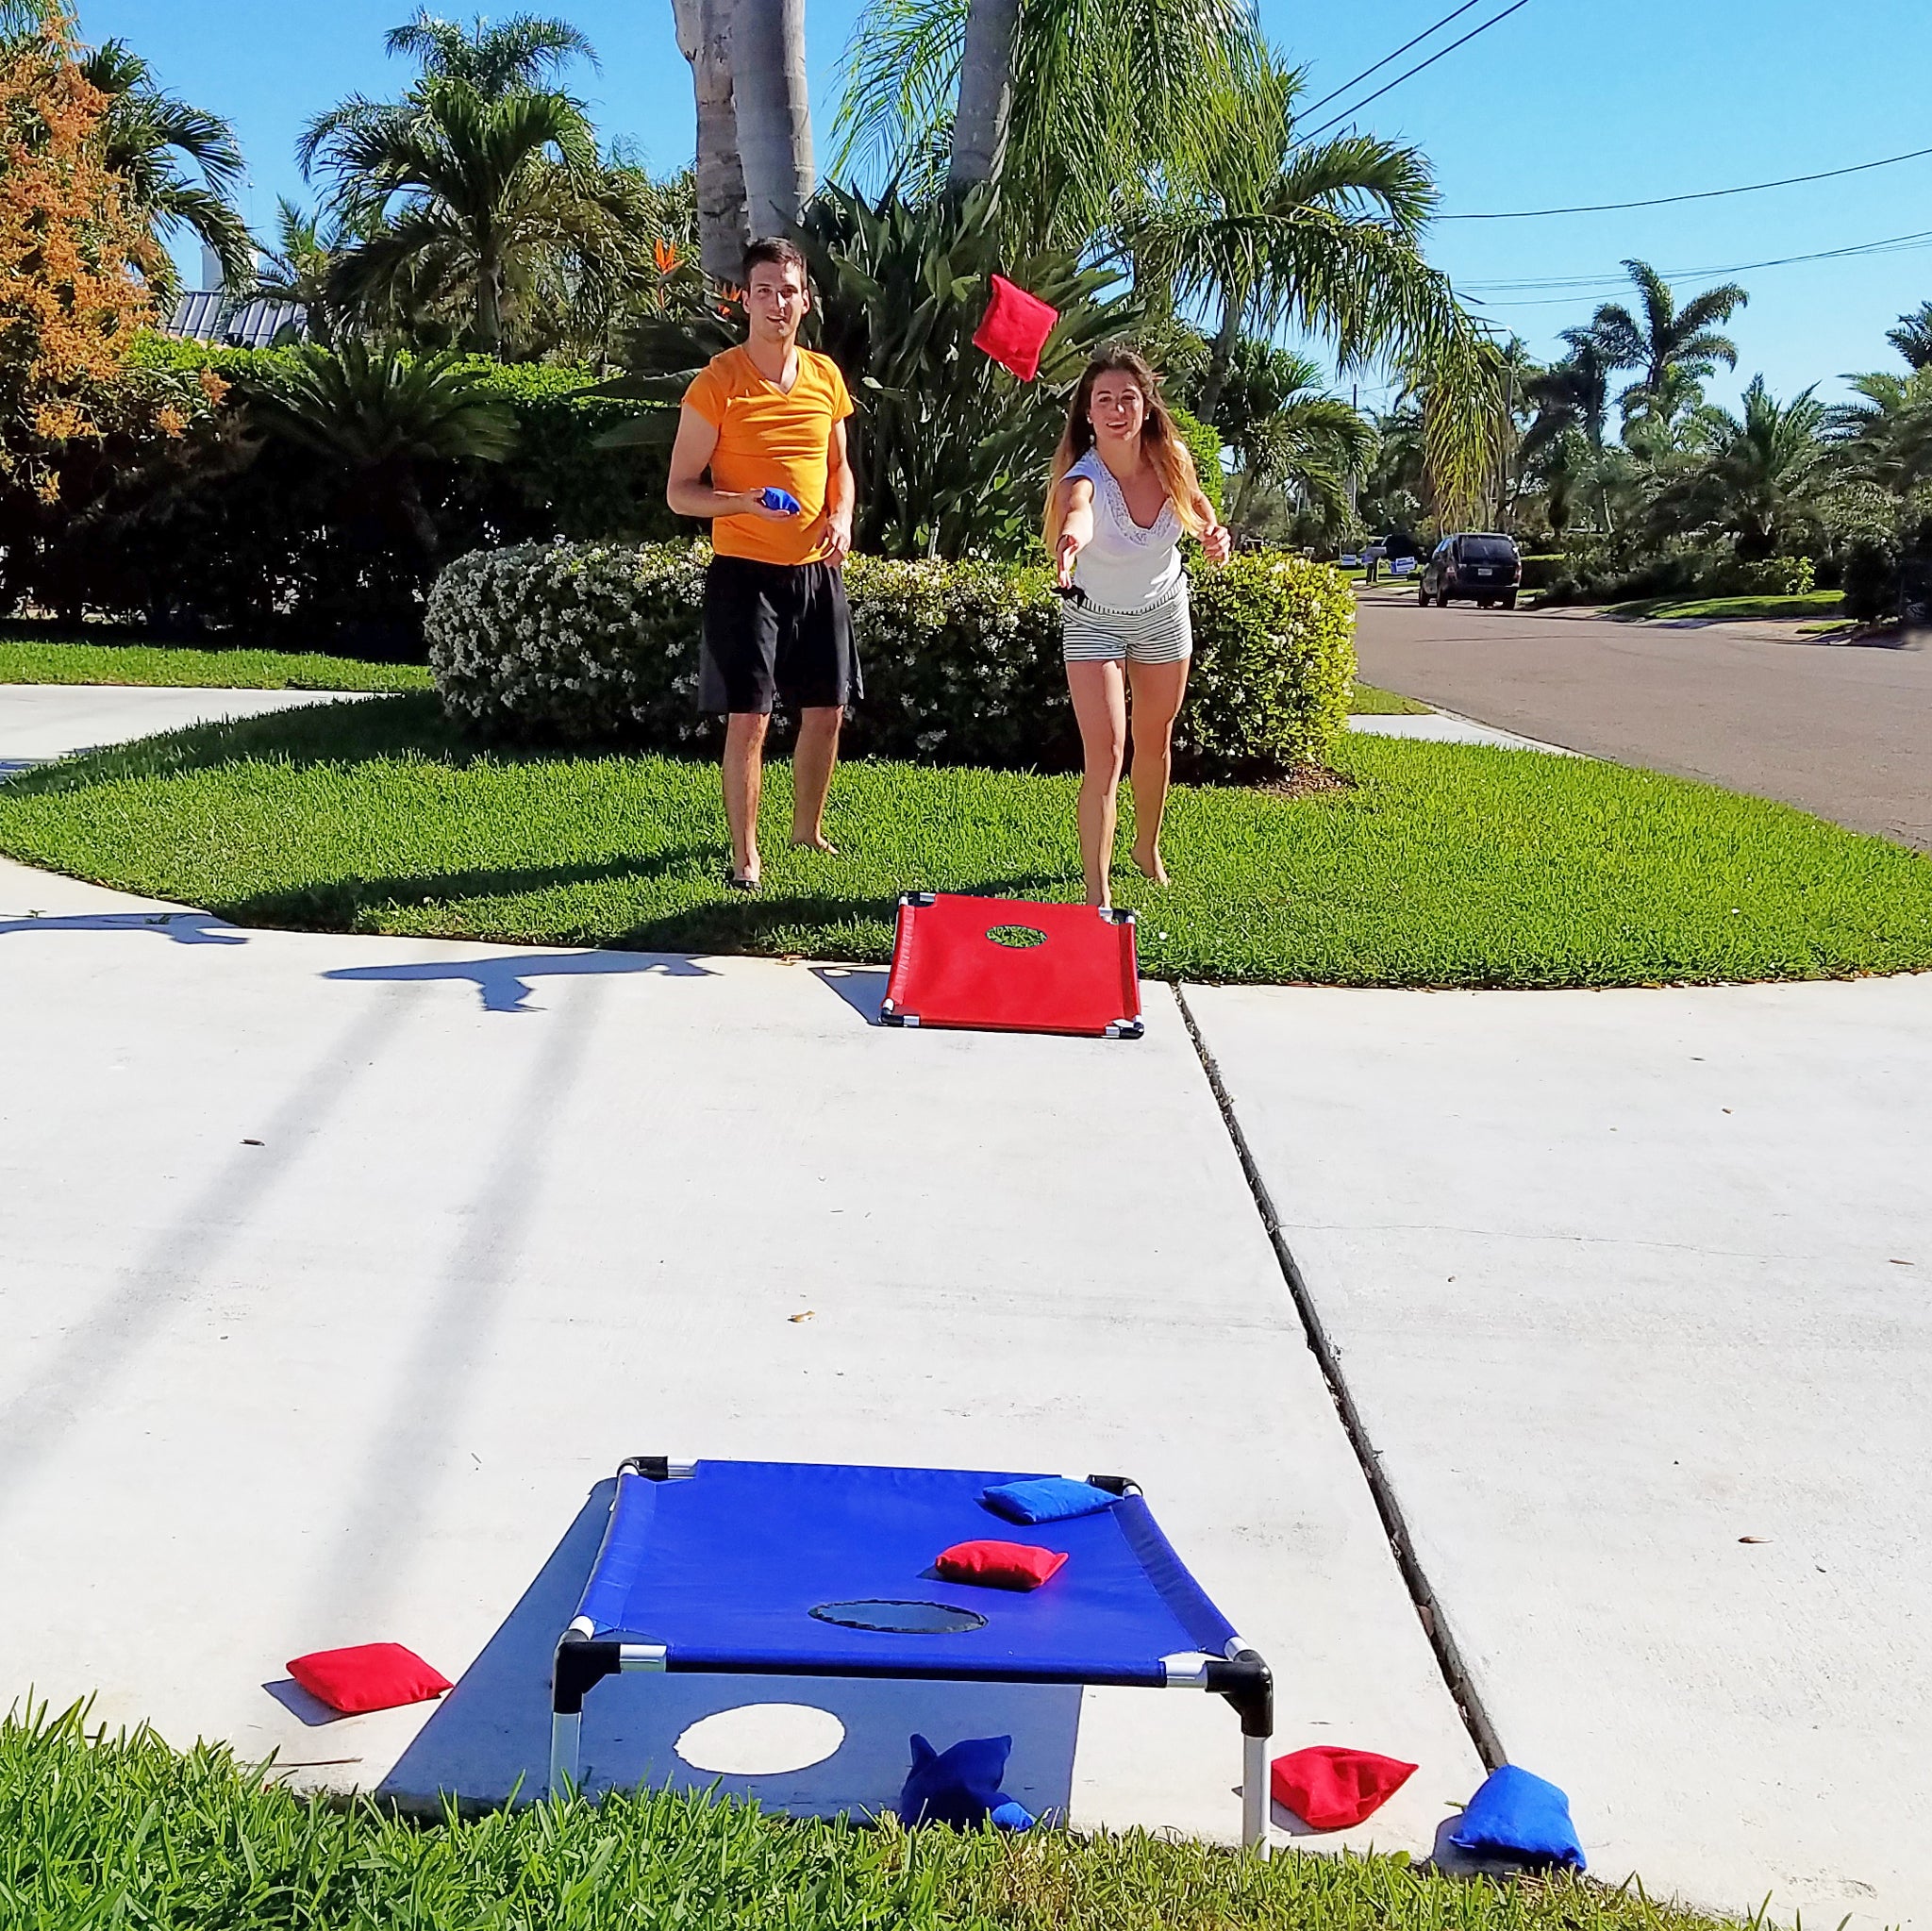 Siblings playing Cornhole Bean Bag game by Funsparks